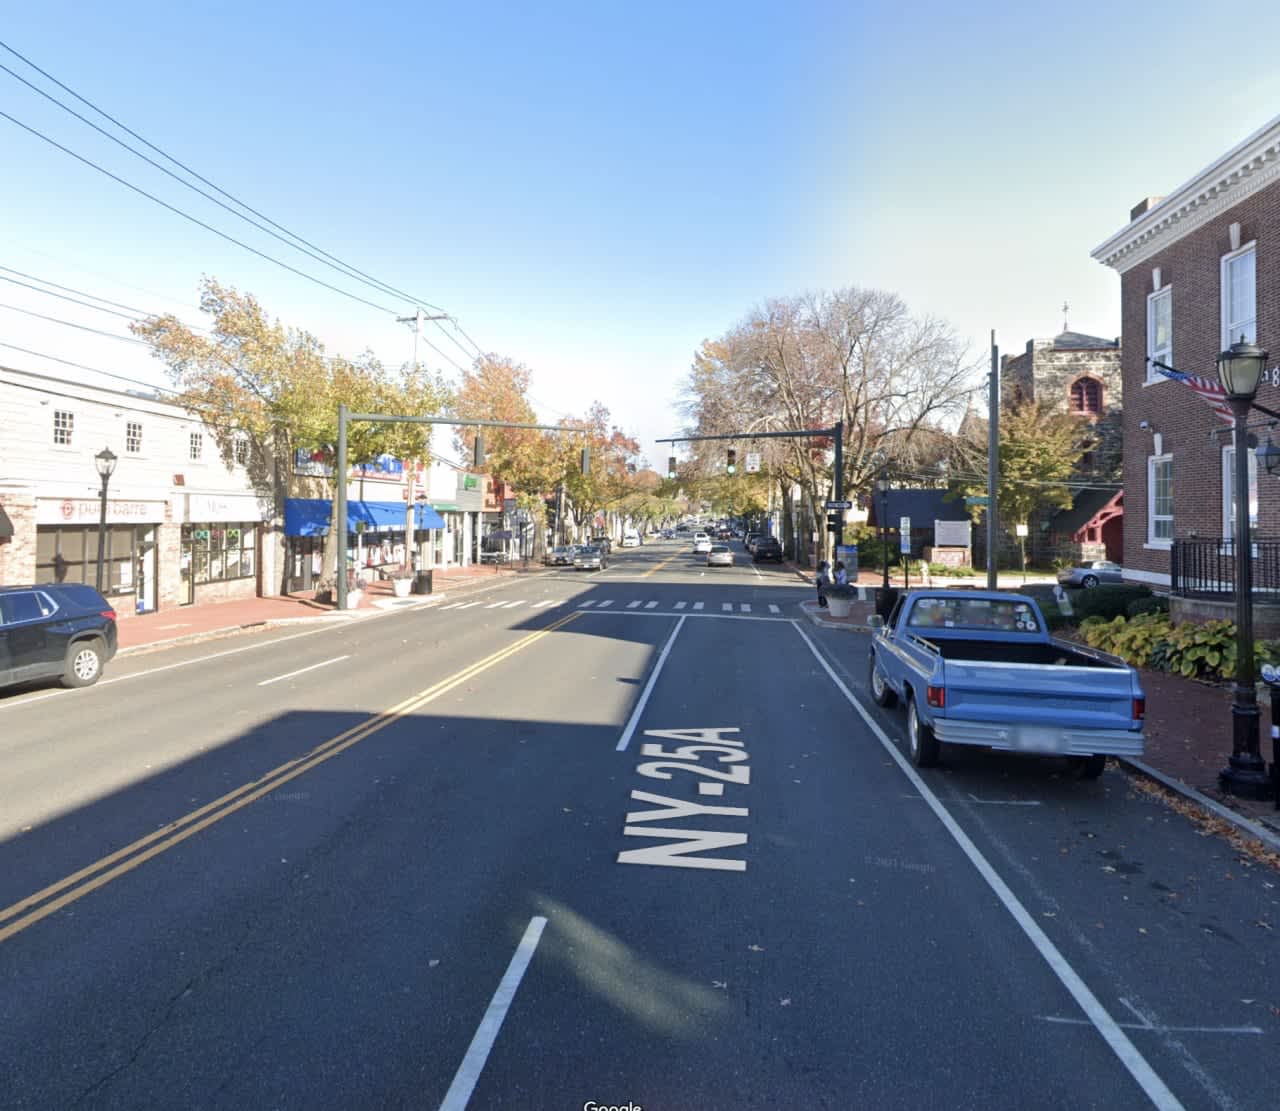 A pedestrian suffered major injuries after being struck by a car on Main Street in Huntington